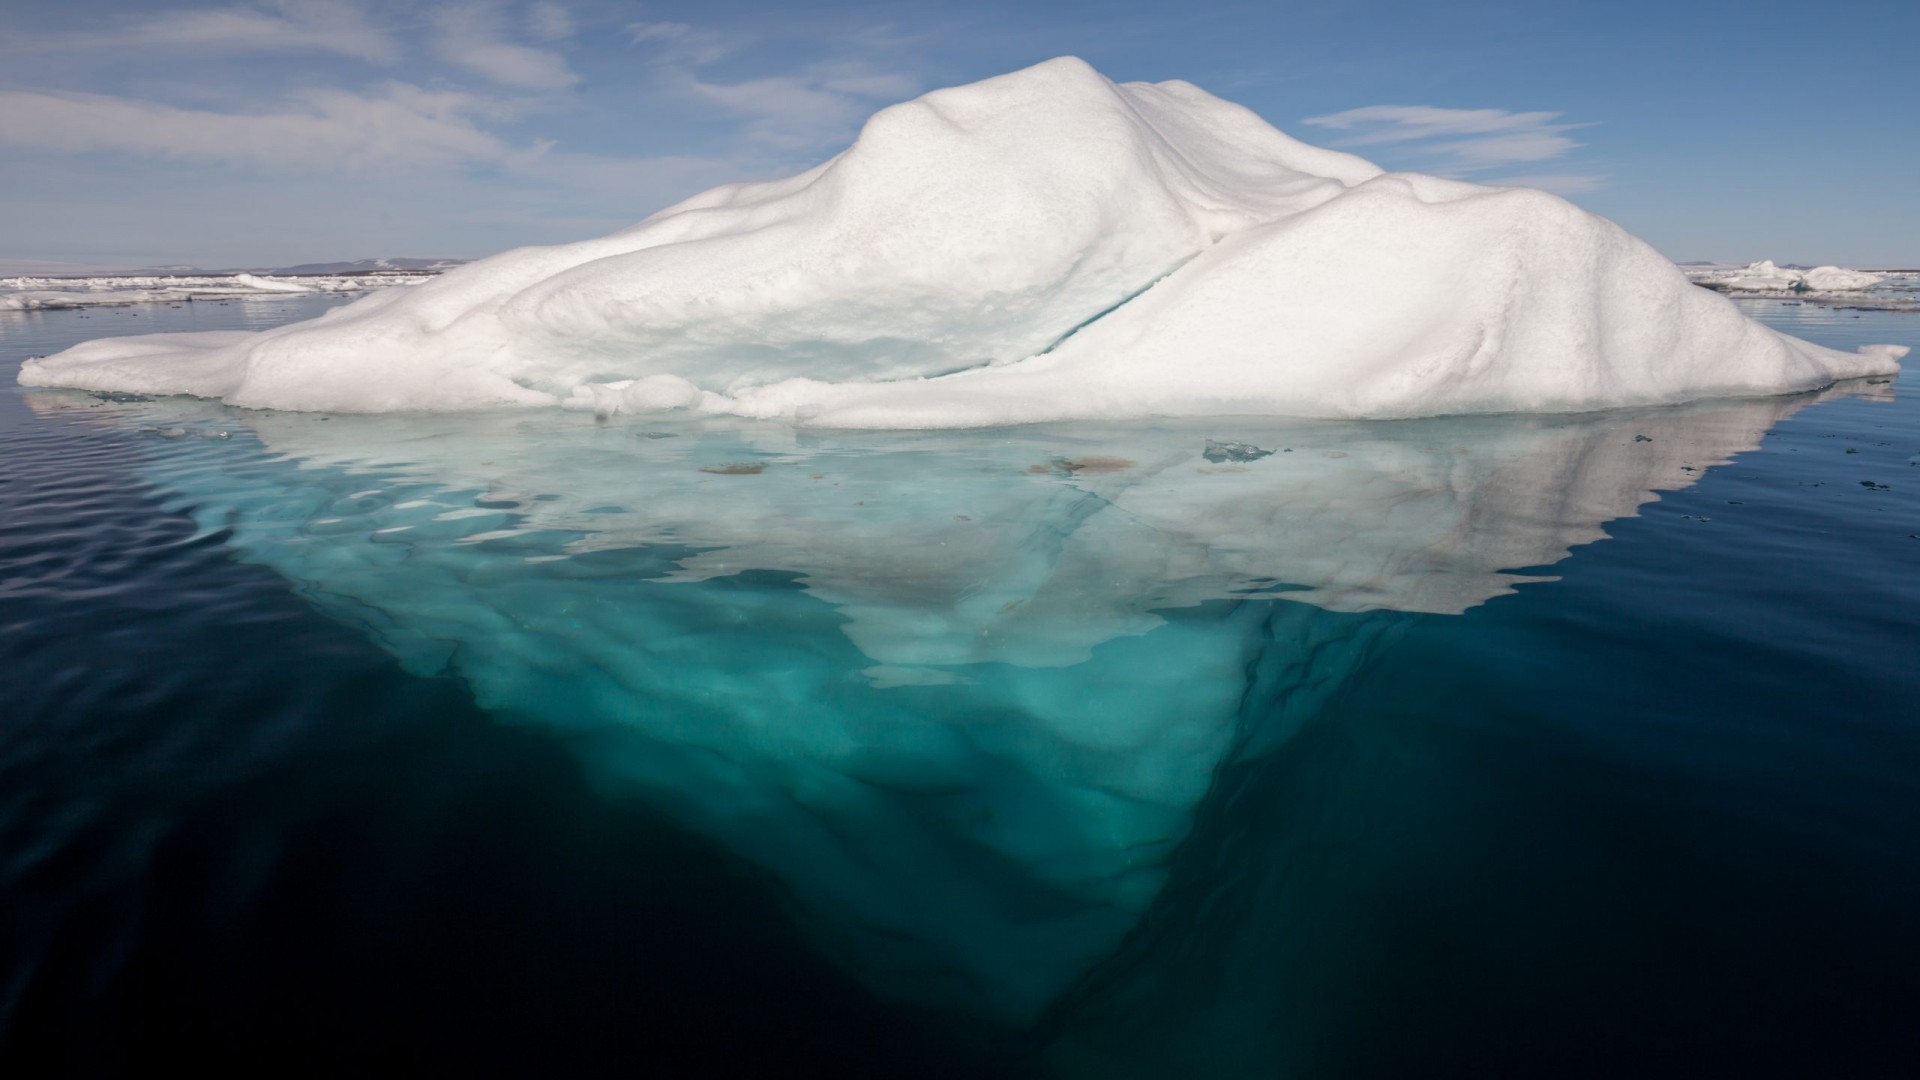 montreal protocol is delaying first ice free arctic summer